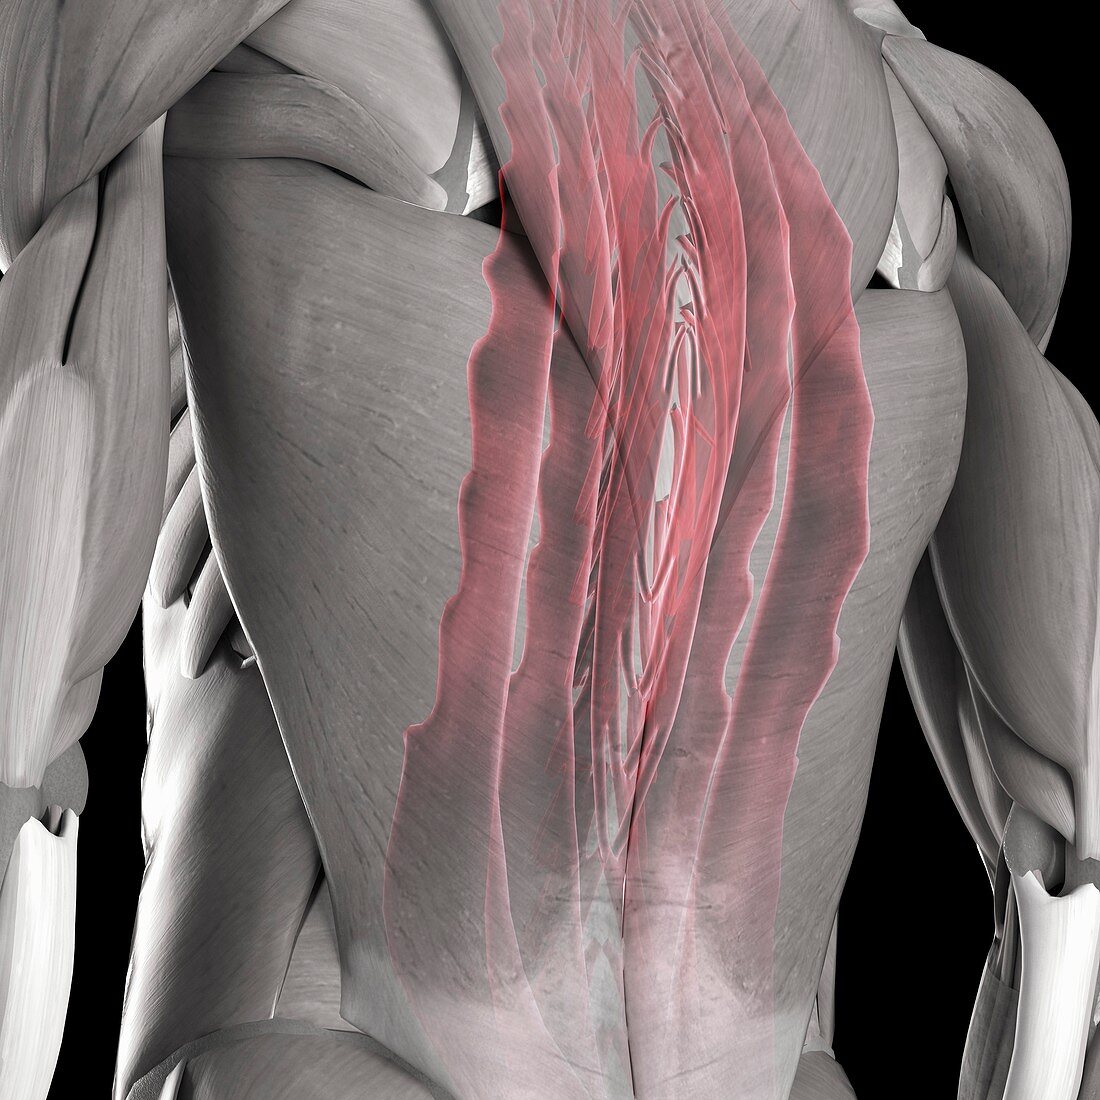 Deep Muscles of the Back, artwork